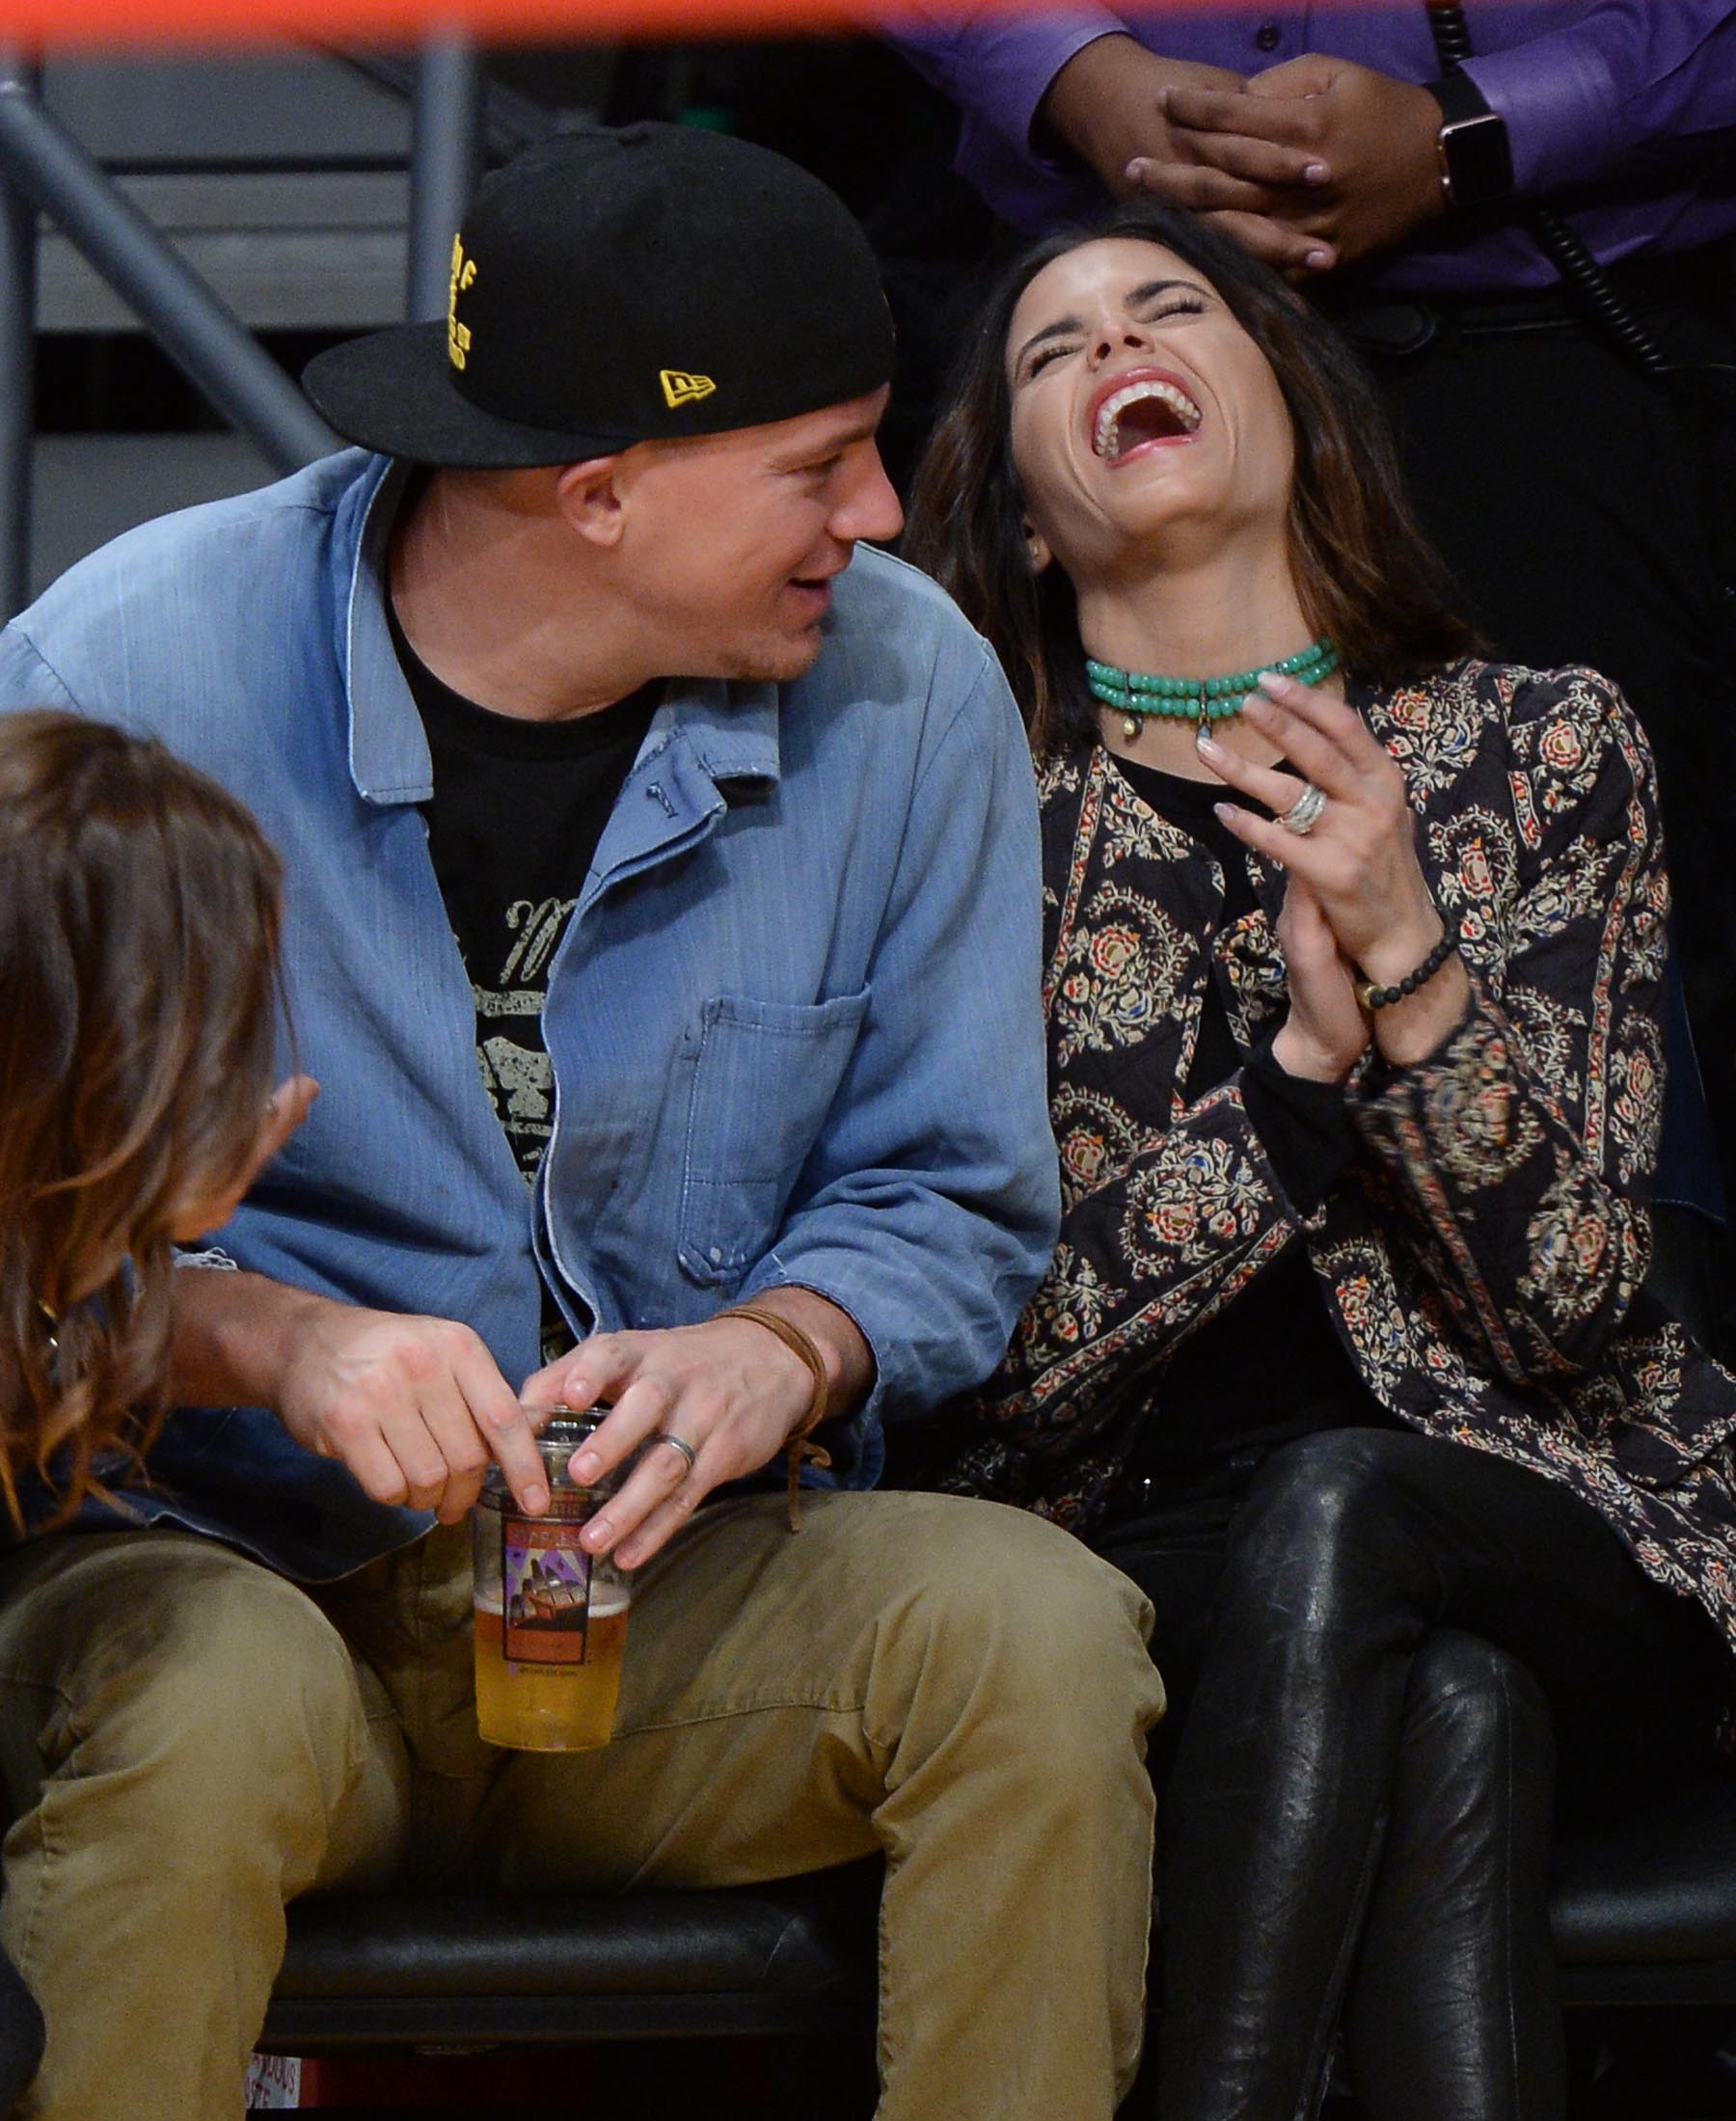 Jenna Dewan at the Staples Center to watch the Lakers